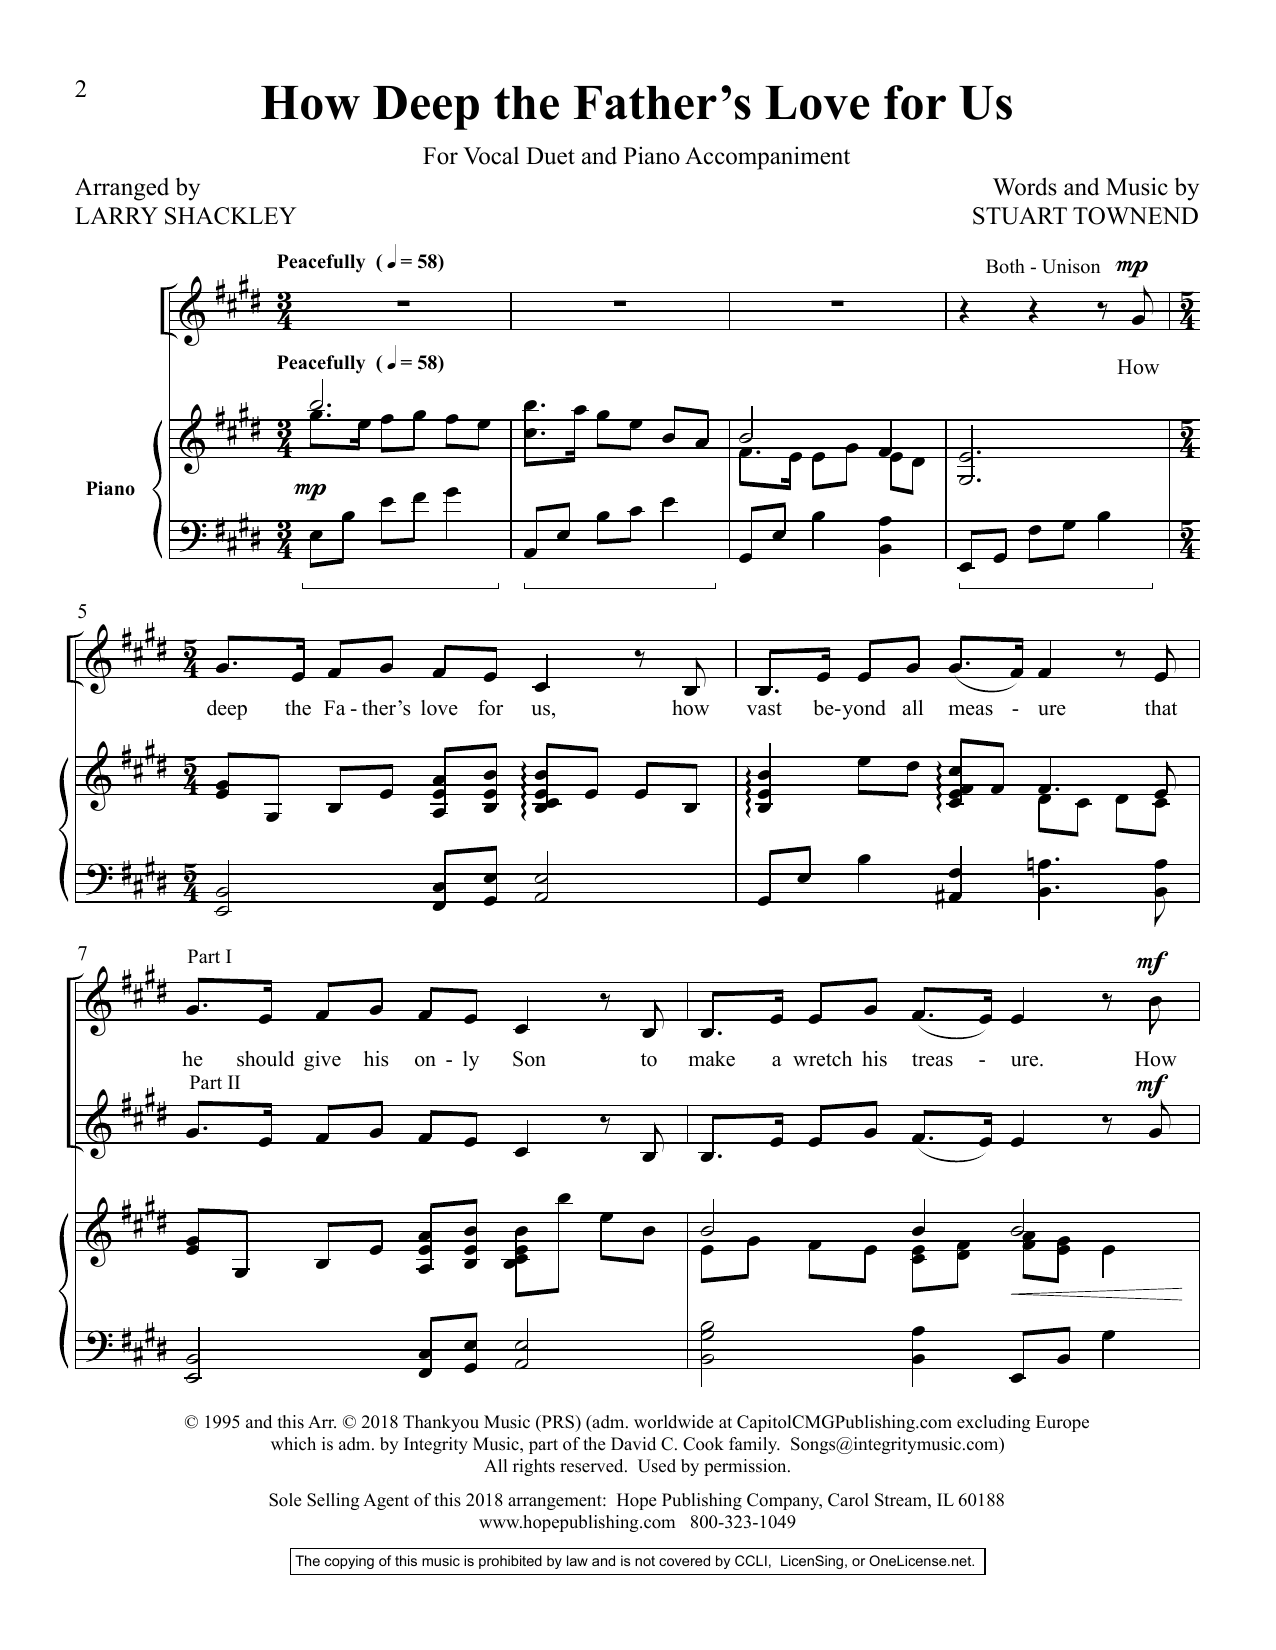 Download Larry Shackley How Deep the Father's Love for Us Sheet Music